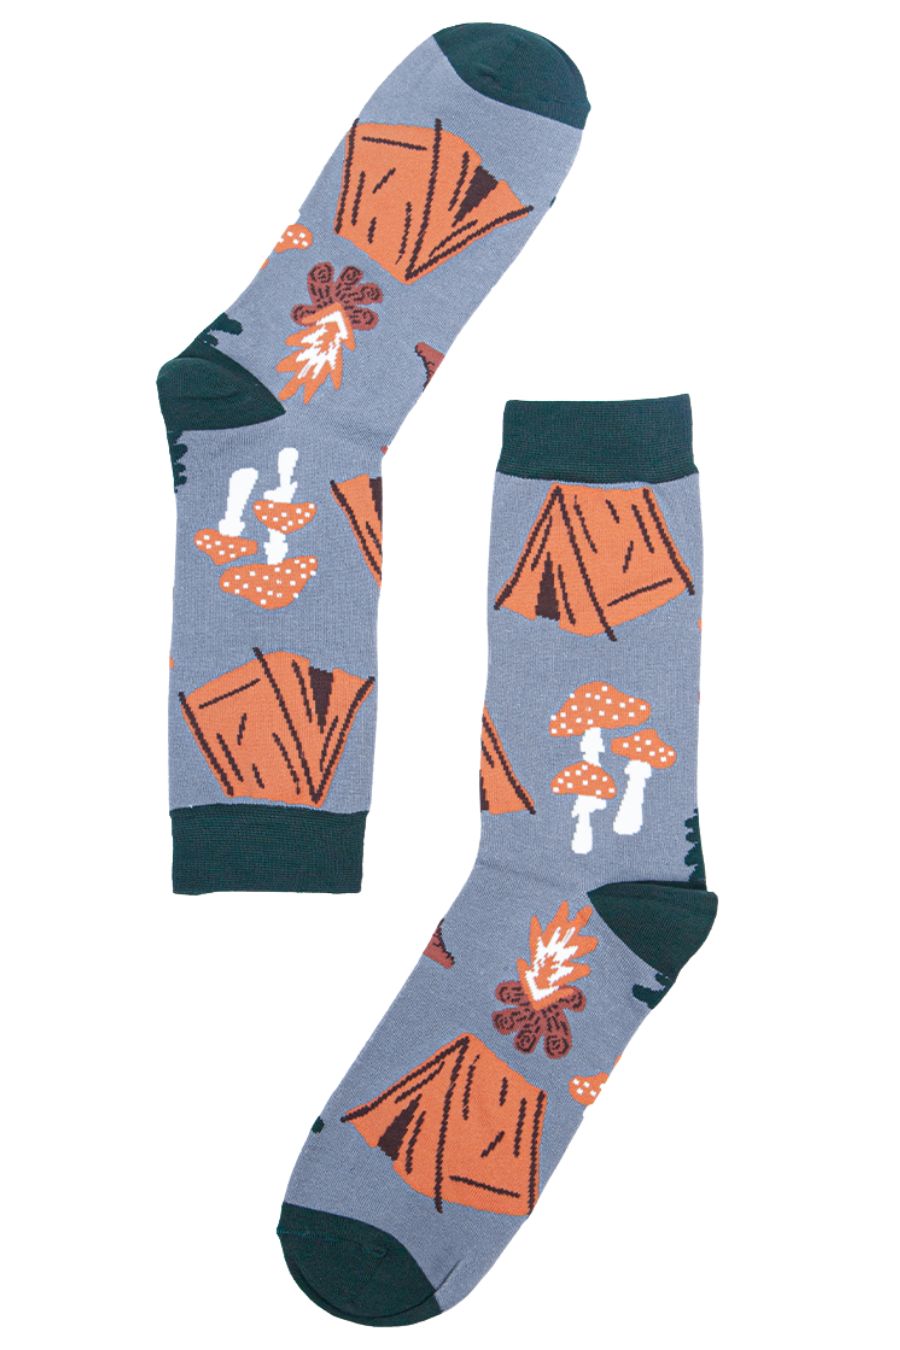 grey, green bamboo dress socks featuring tents, campfires, toadstools and trees